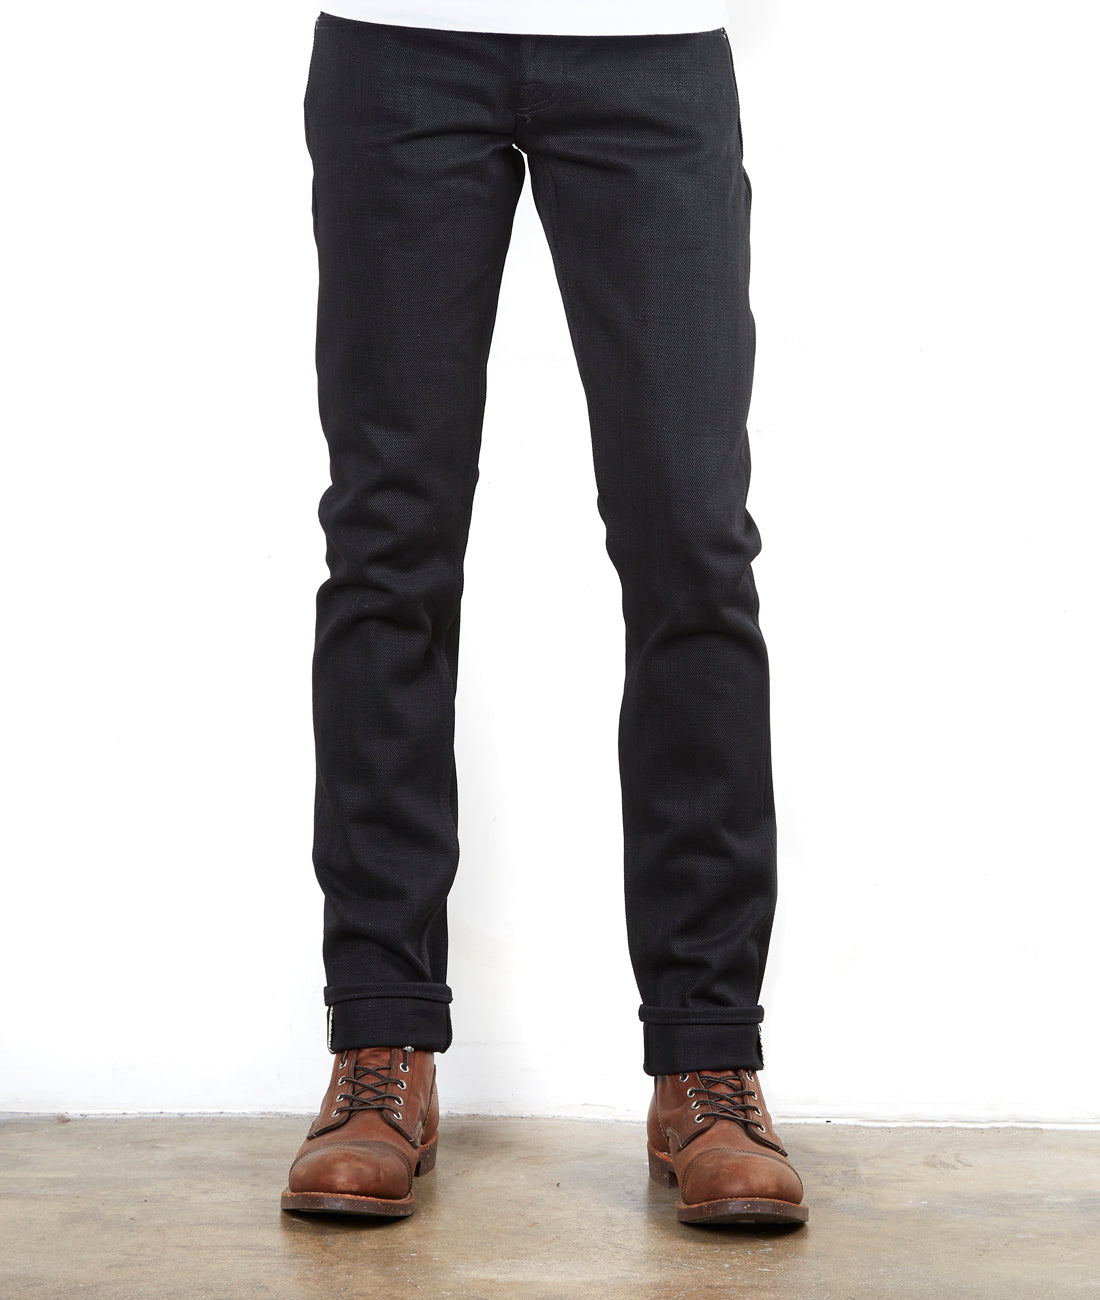 Brave Star Selvage, Jeans, Brave Star 25oz Heavyweight Double Black  Selvage Denim Size 28